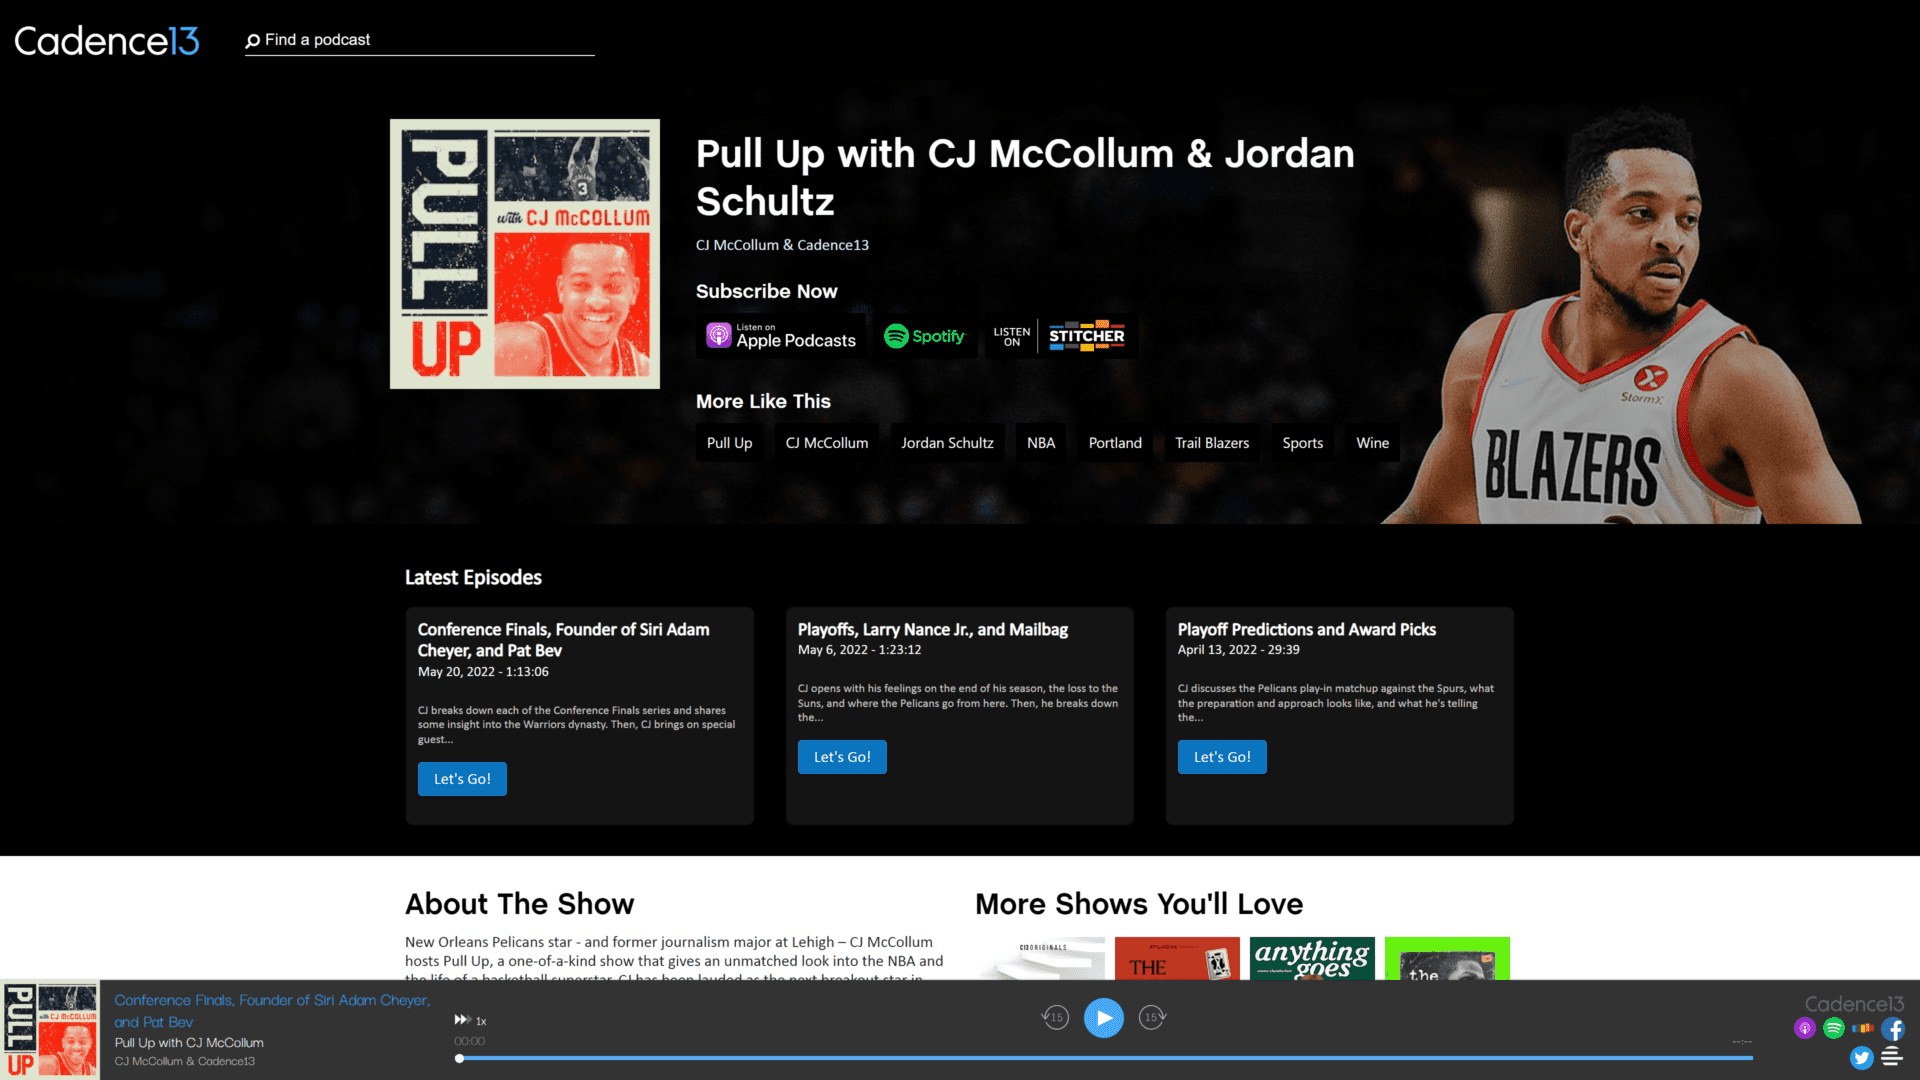 screenshot of the pullup with CJ McCollum homepage